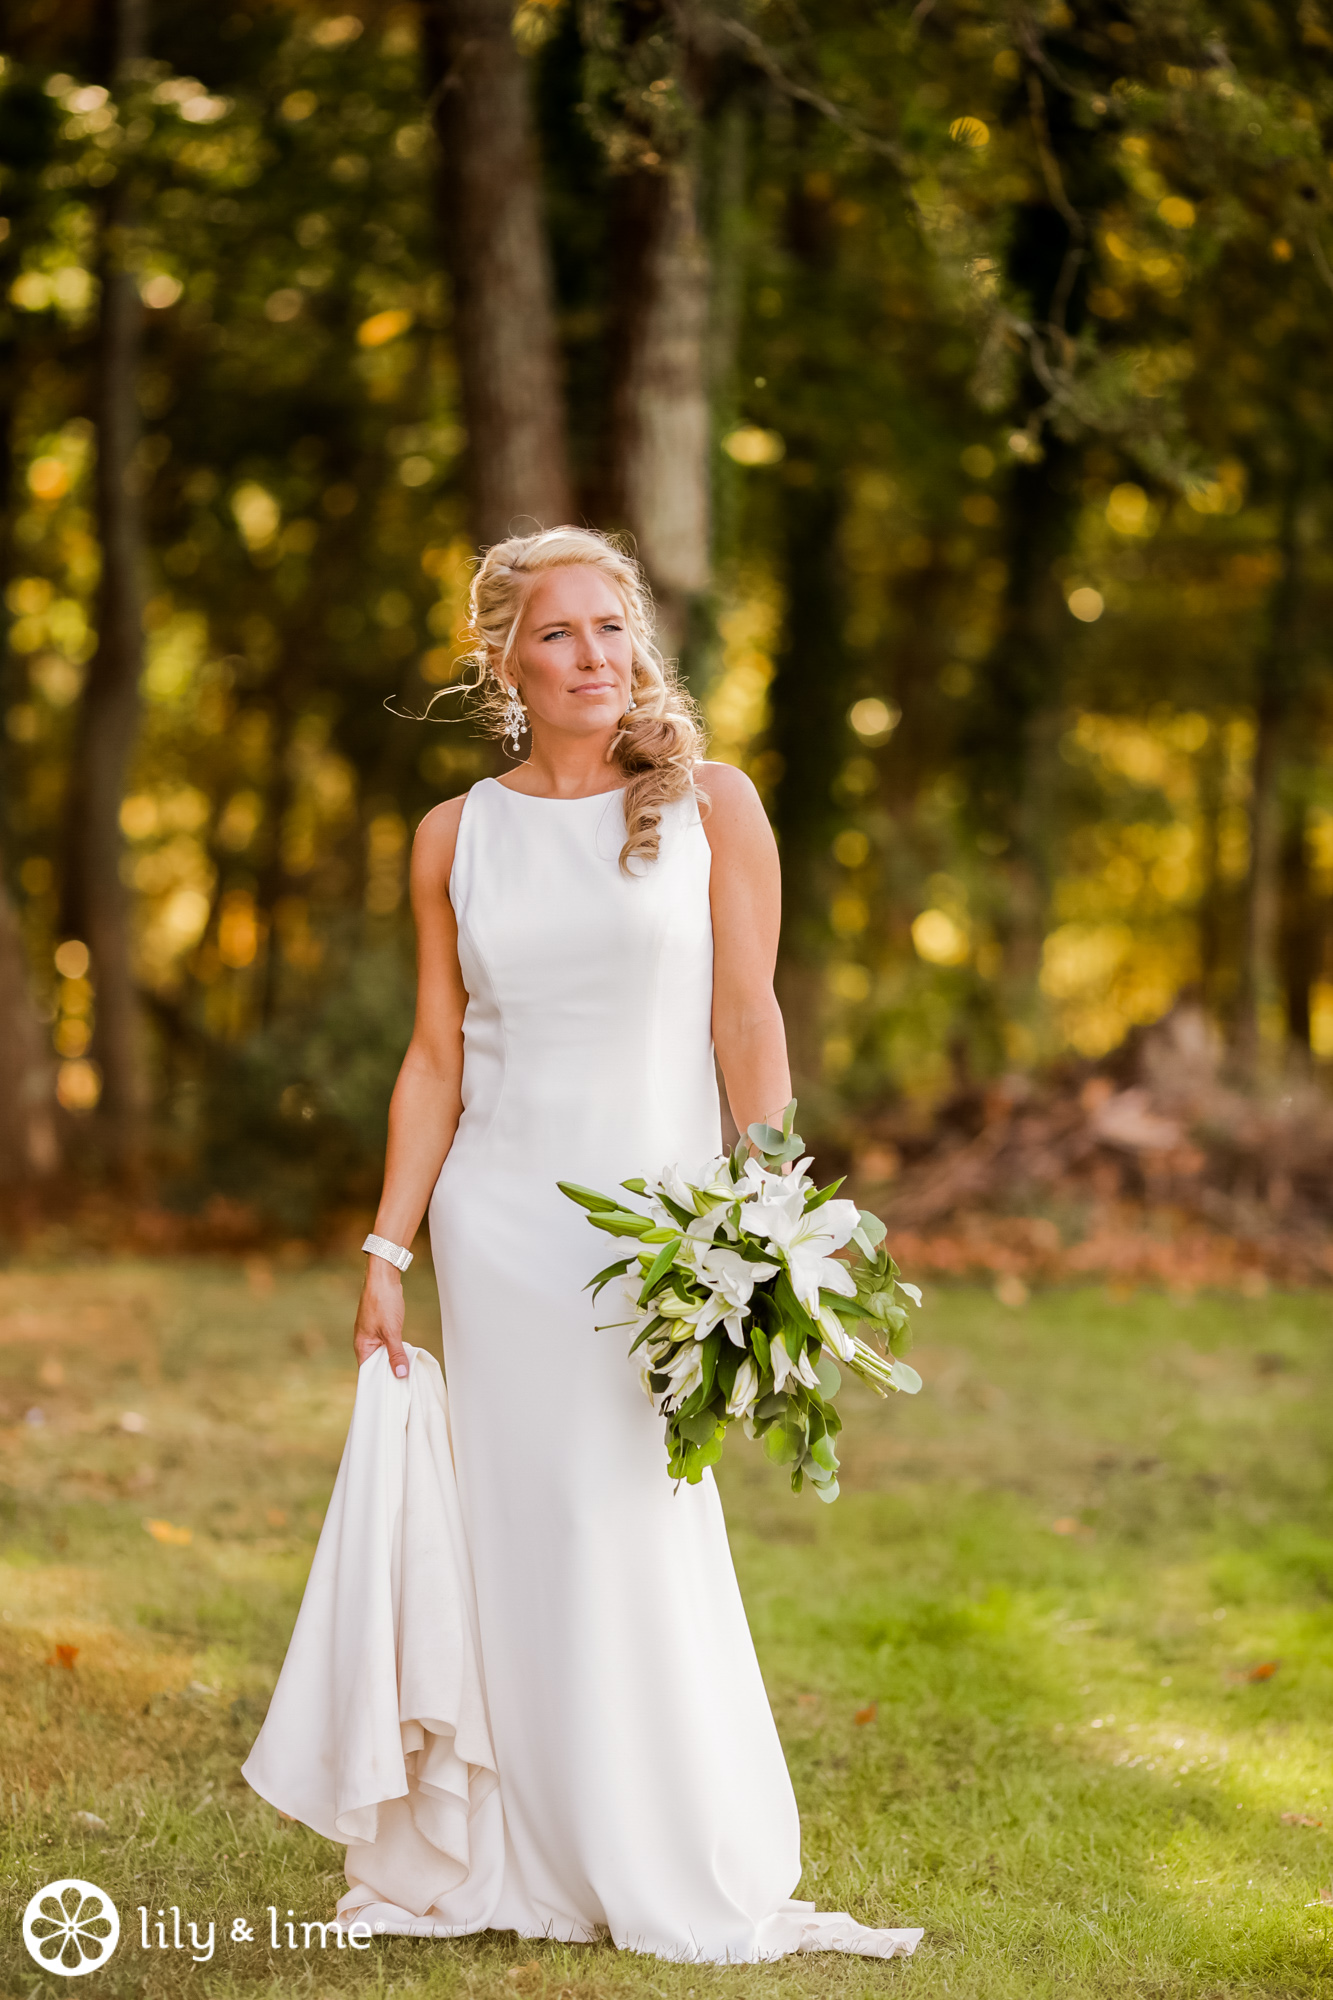 Full Length View on Beautiful Woman Posing in a Wedding Dress. Stock Image  - Image of attractive, bridal: 69114279